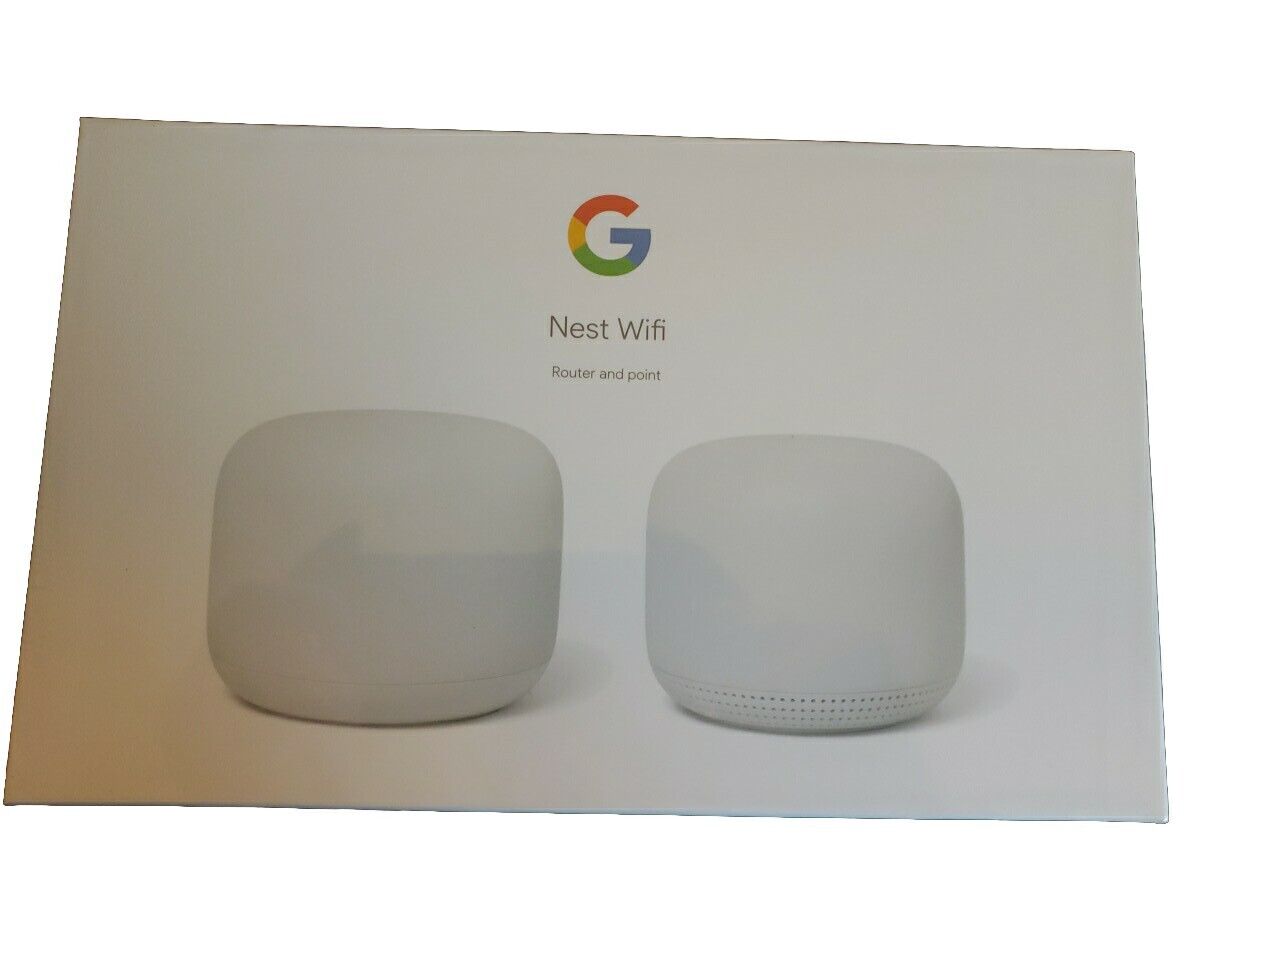 Google Nest Wifi Router and Point - Snow - NEW, SEALED IN BOX - ***